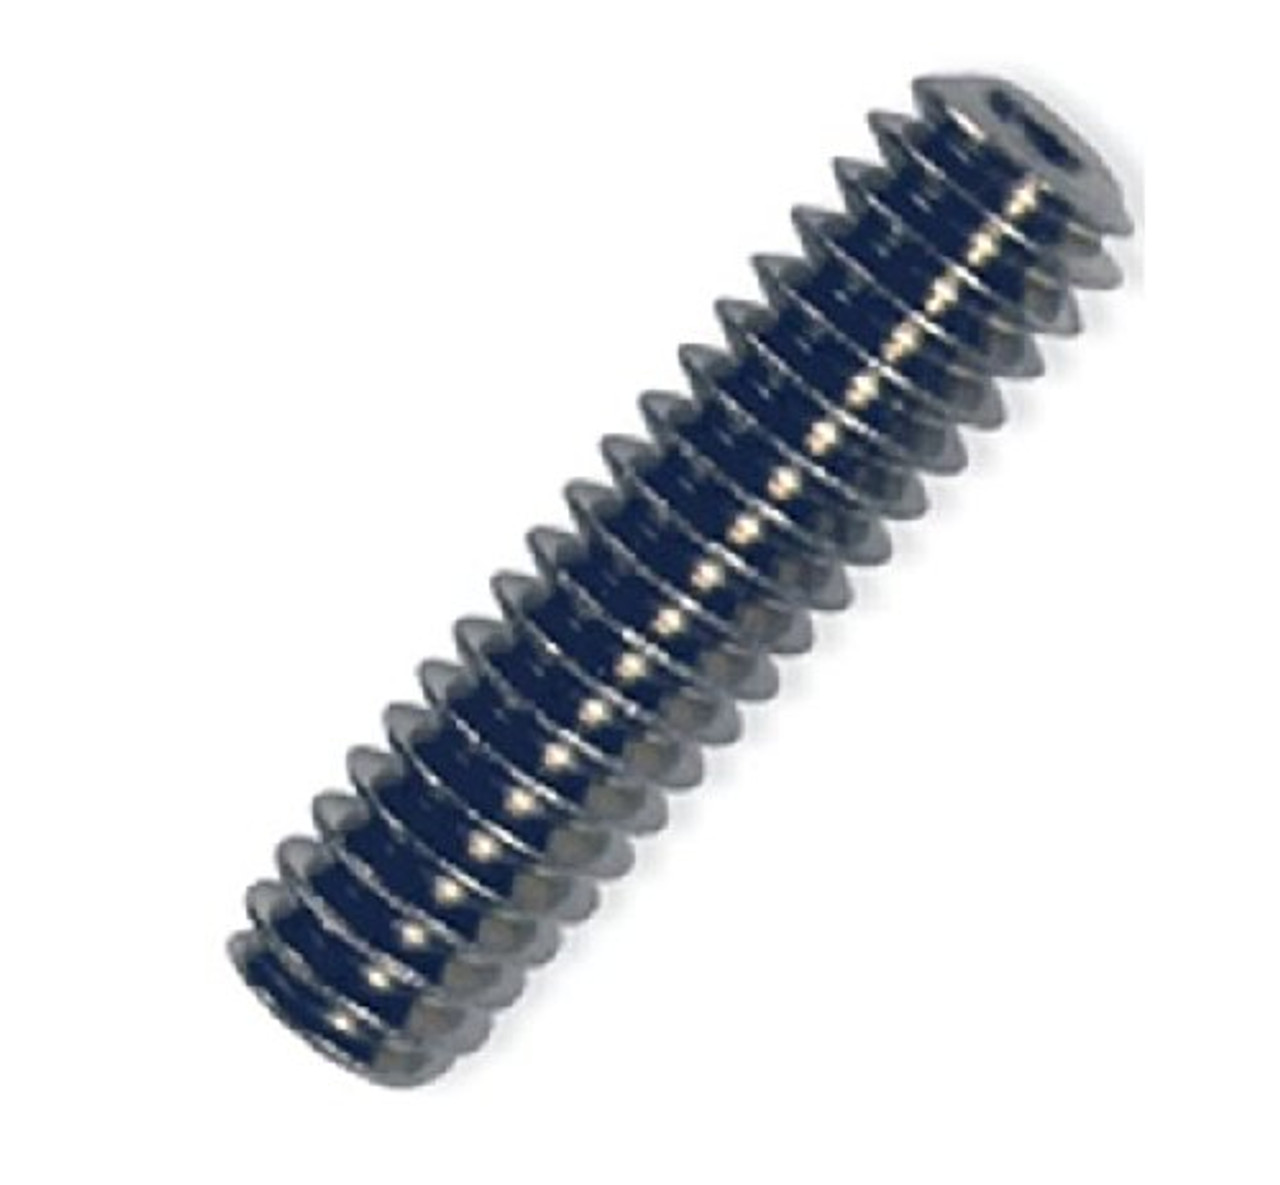 Grub Screws M5 x 5mm (10 PACK) A2 Stainless Steel Socket Allen Key Cup Point Grub Screw Free UK Delivery